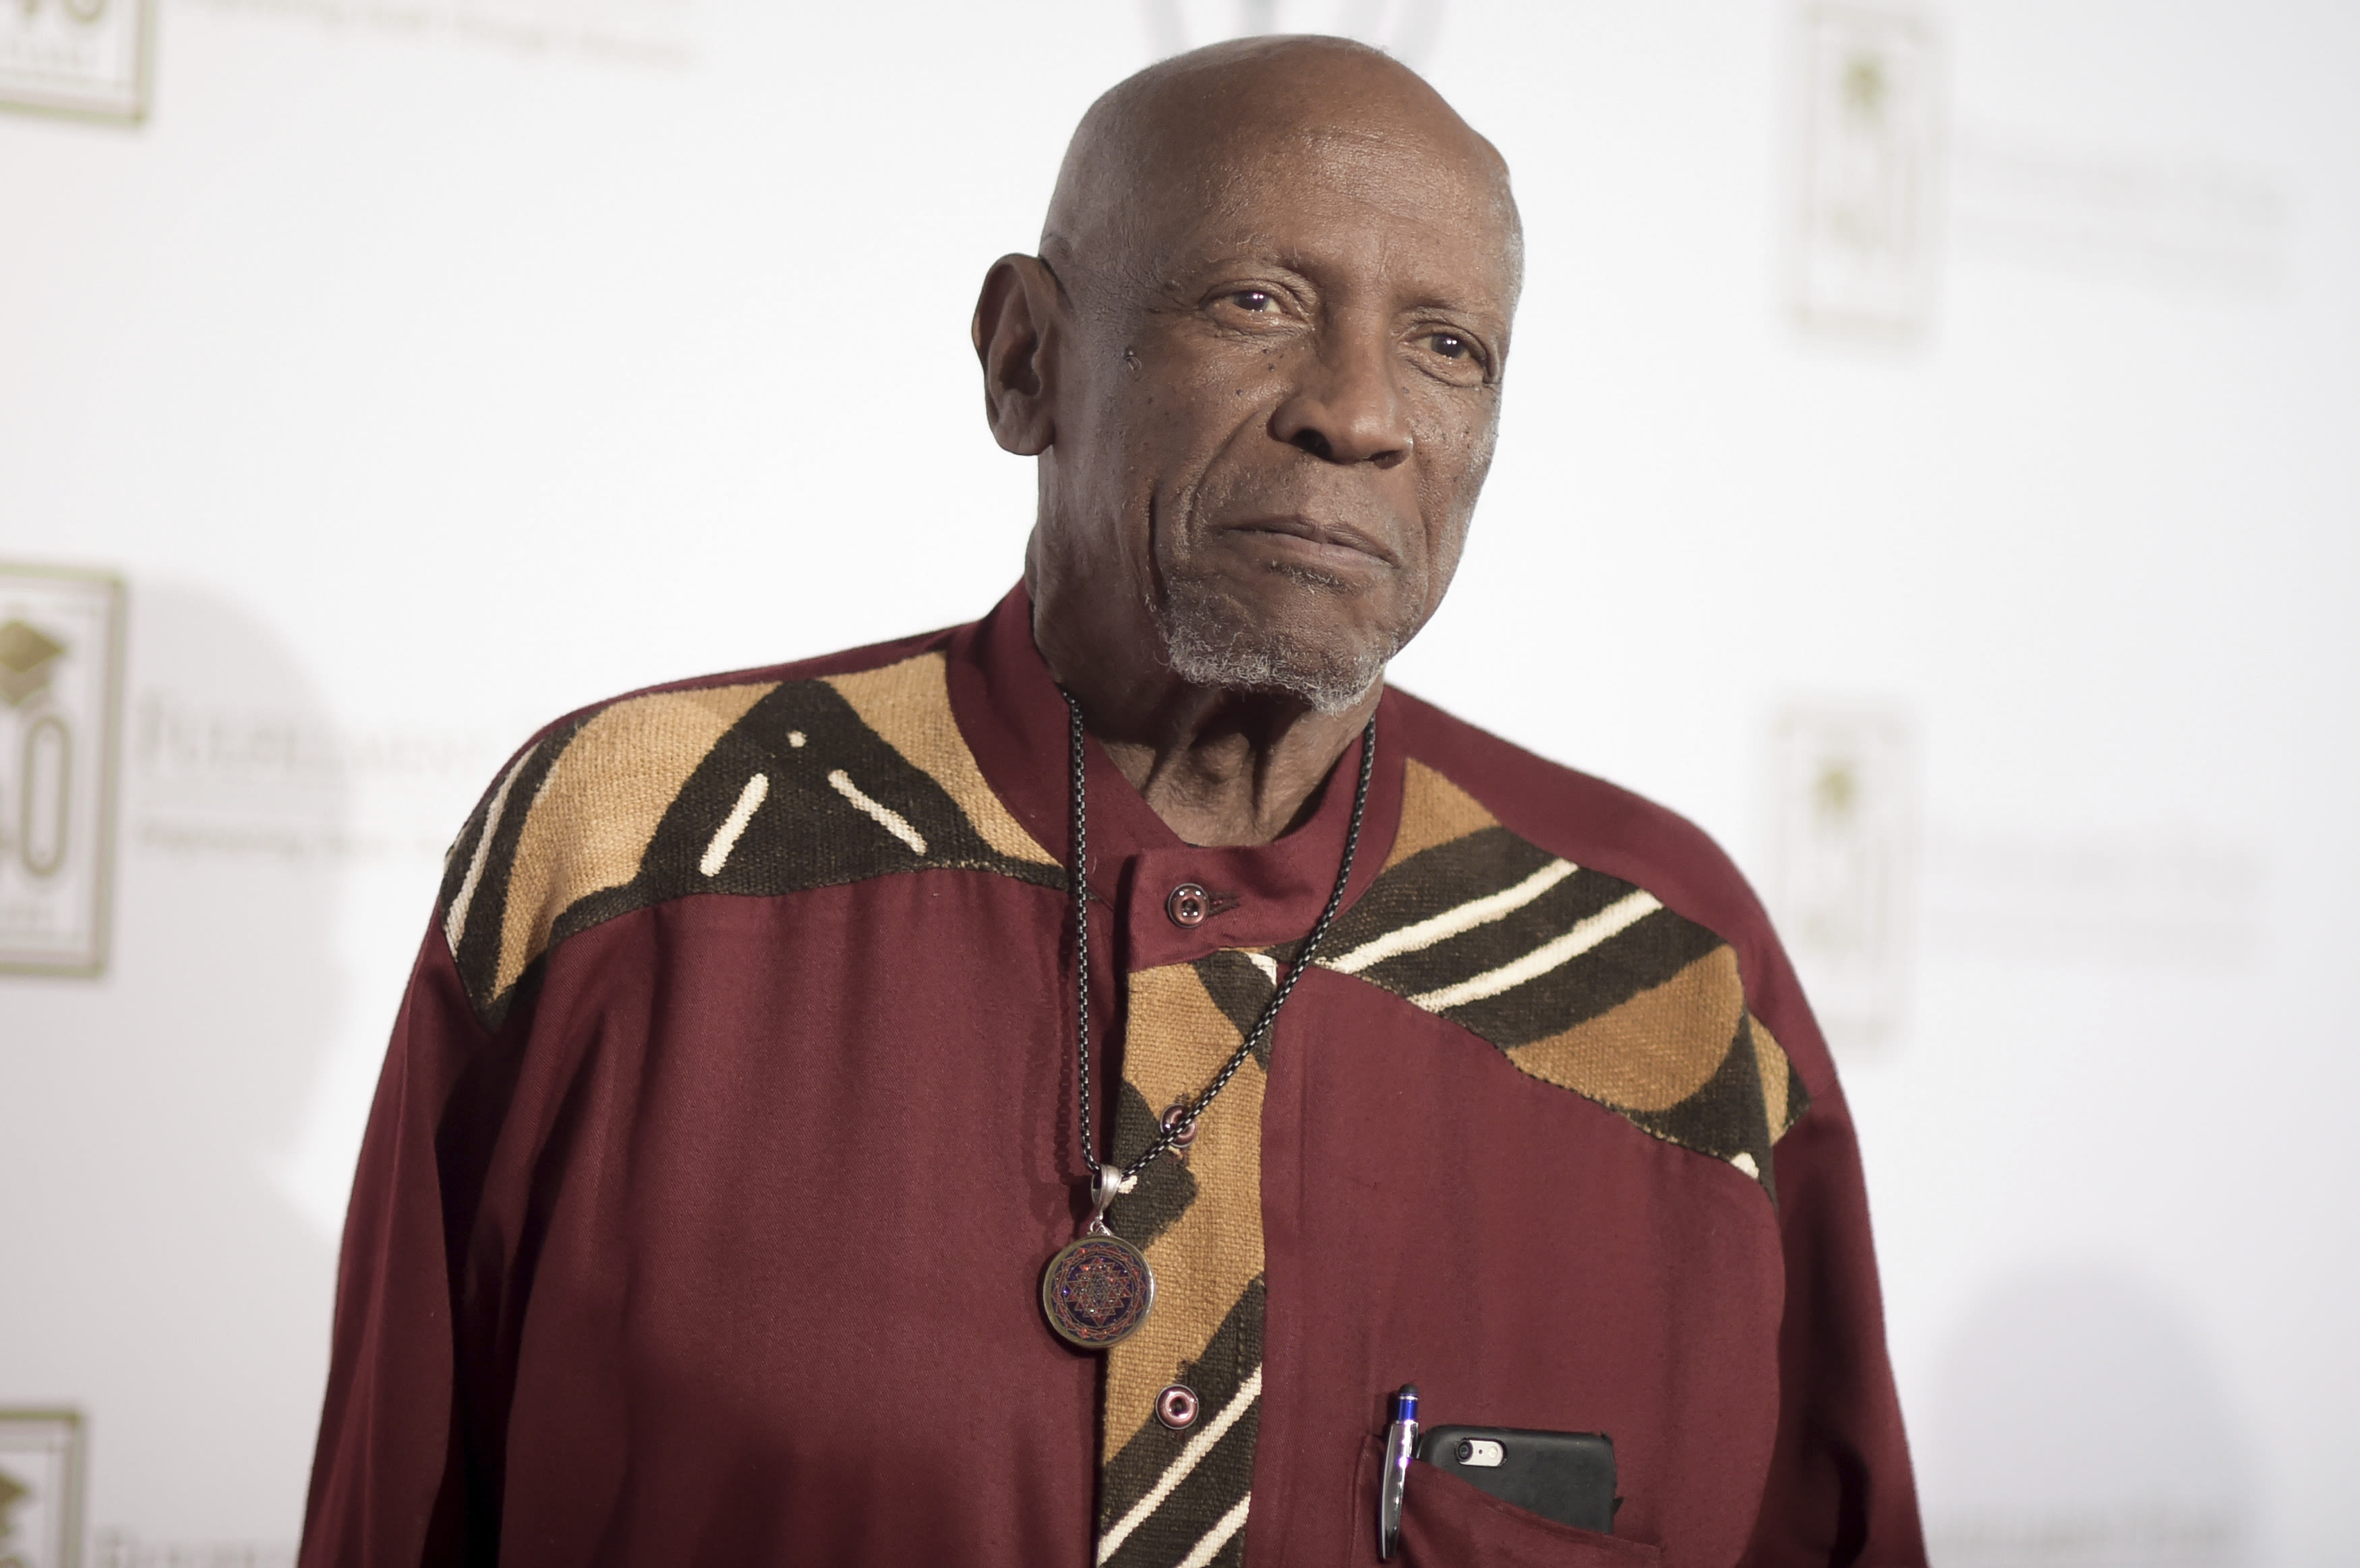 'An Officer and a Gentleman' actor Louis Gossett Jr. dies of COPD: What to know about symptoms and risks